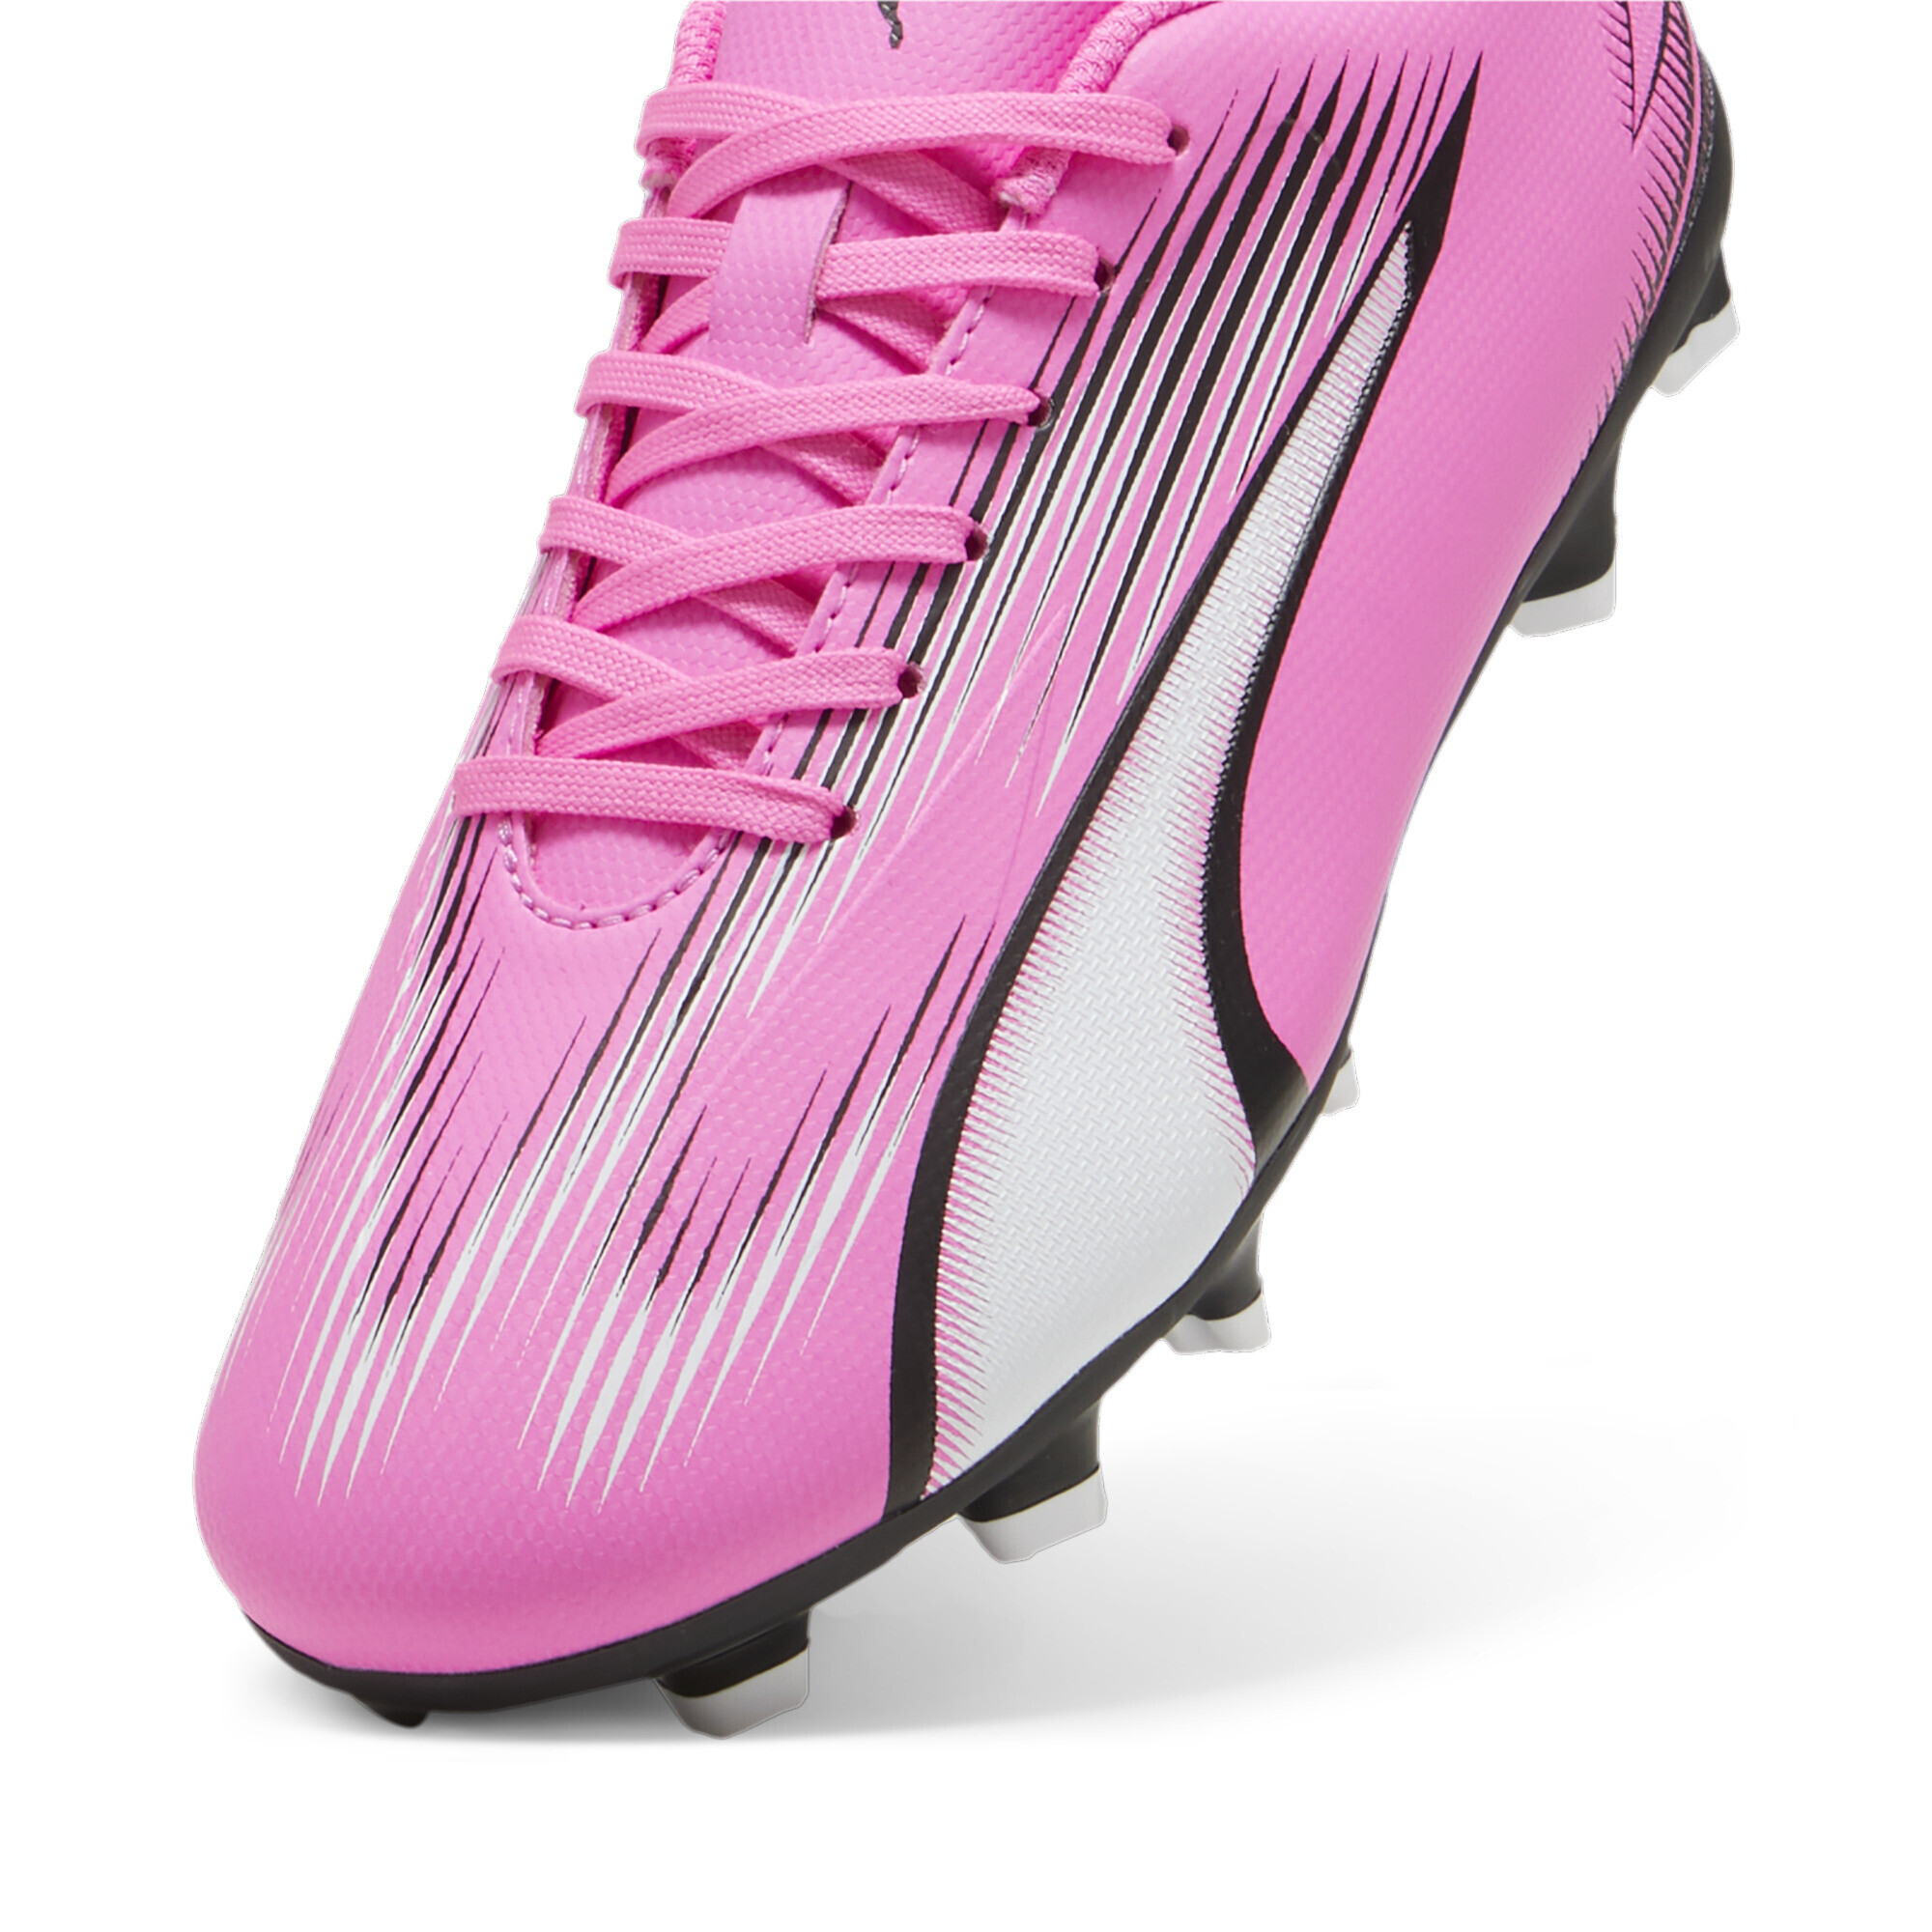 PUMA ULTRA PLAY FG/AG Youth Football Boots In Pink, Size EU 34.5